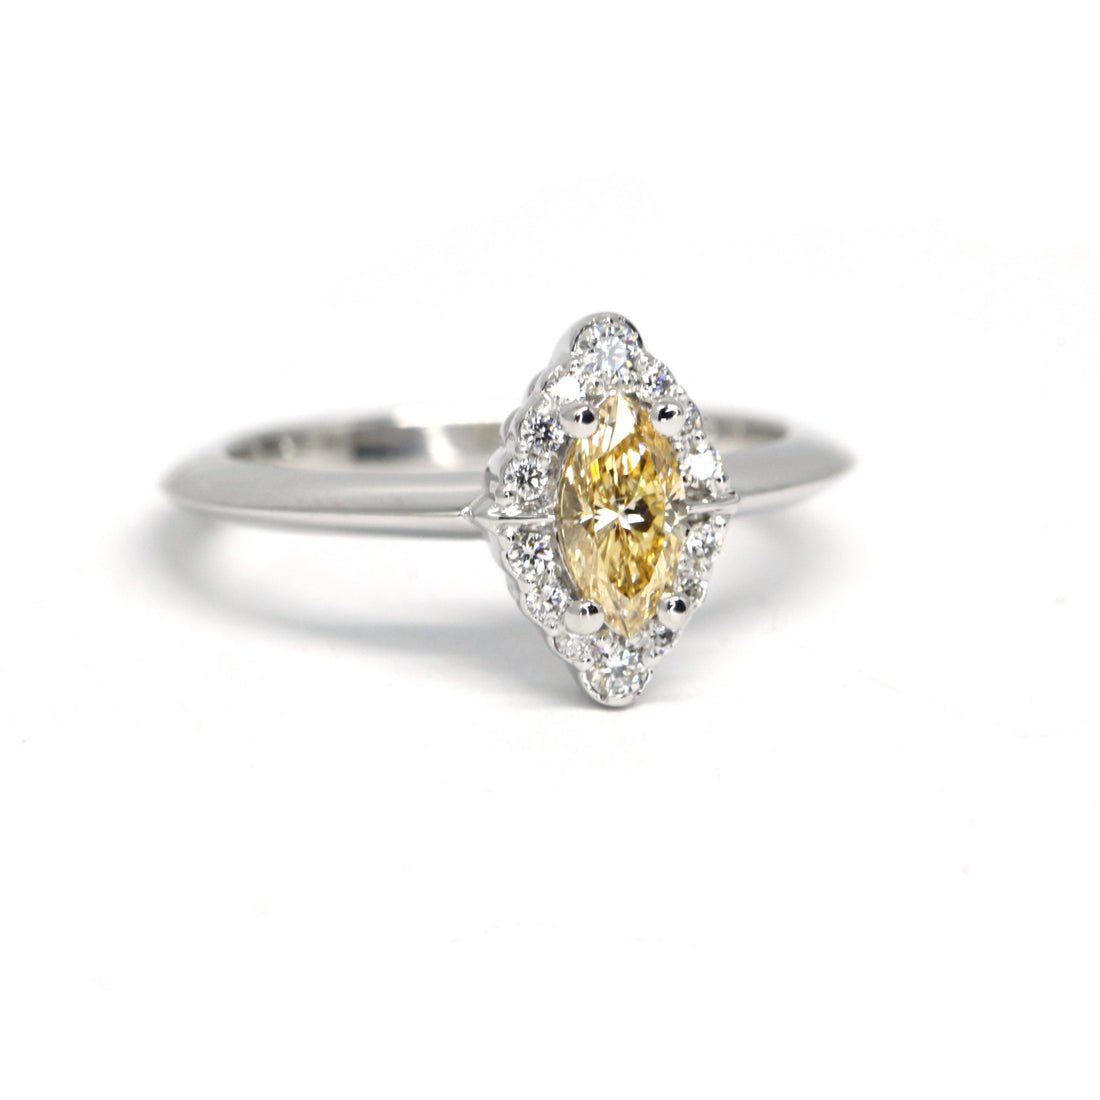 Quater side picture of yellow diamond marquise shape engagement ring bena jewelry edgy fine jewelry montreal made in canada fancy shape color diamond gia certified white gold bridal ring little italy custom made jewelry